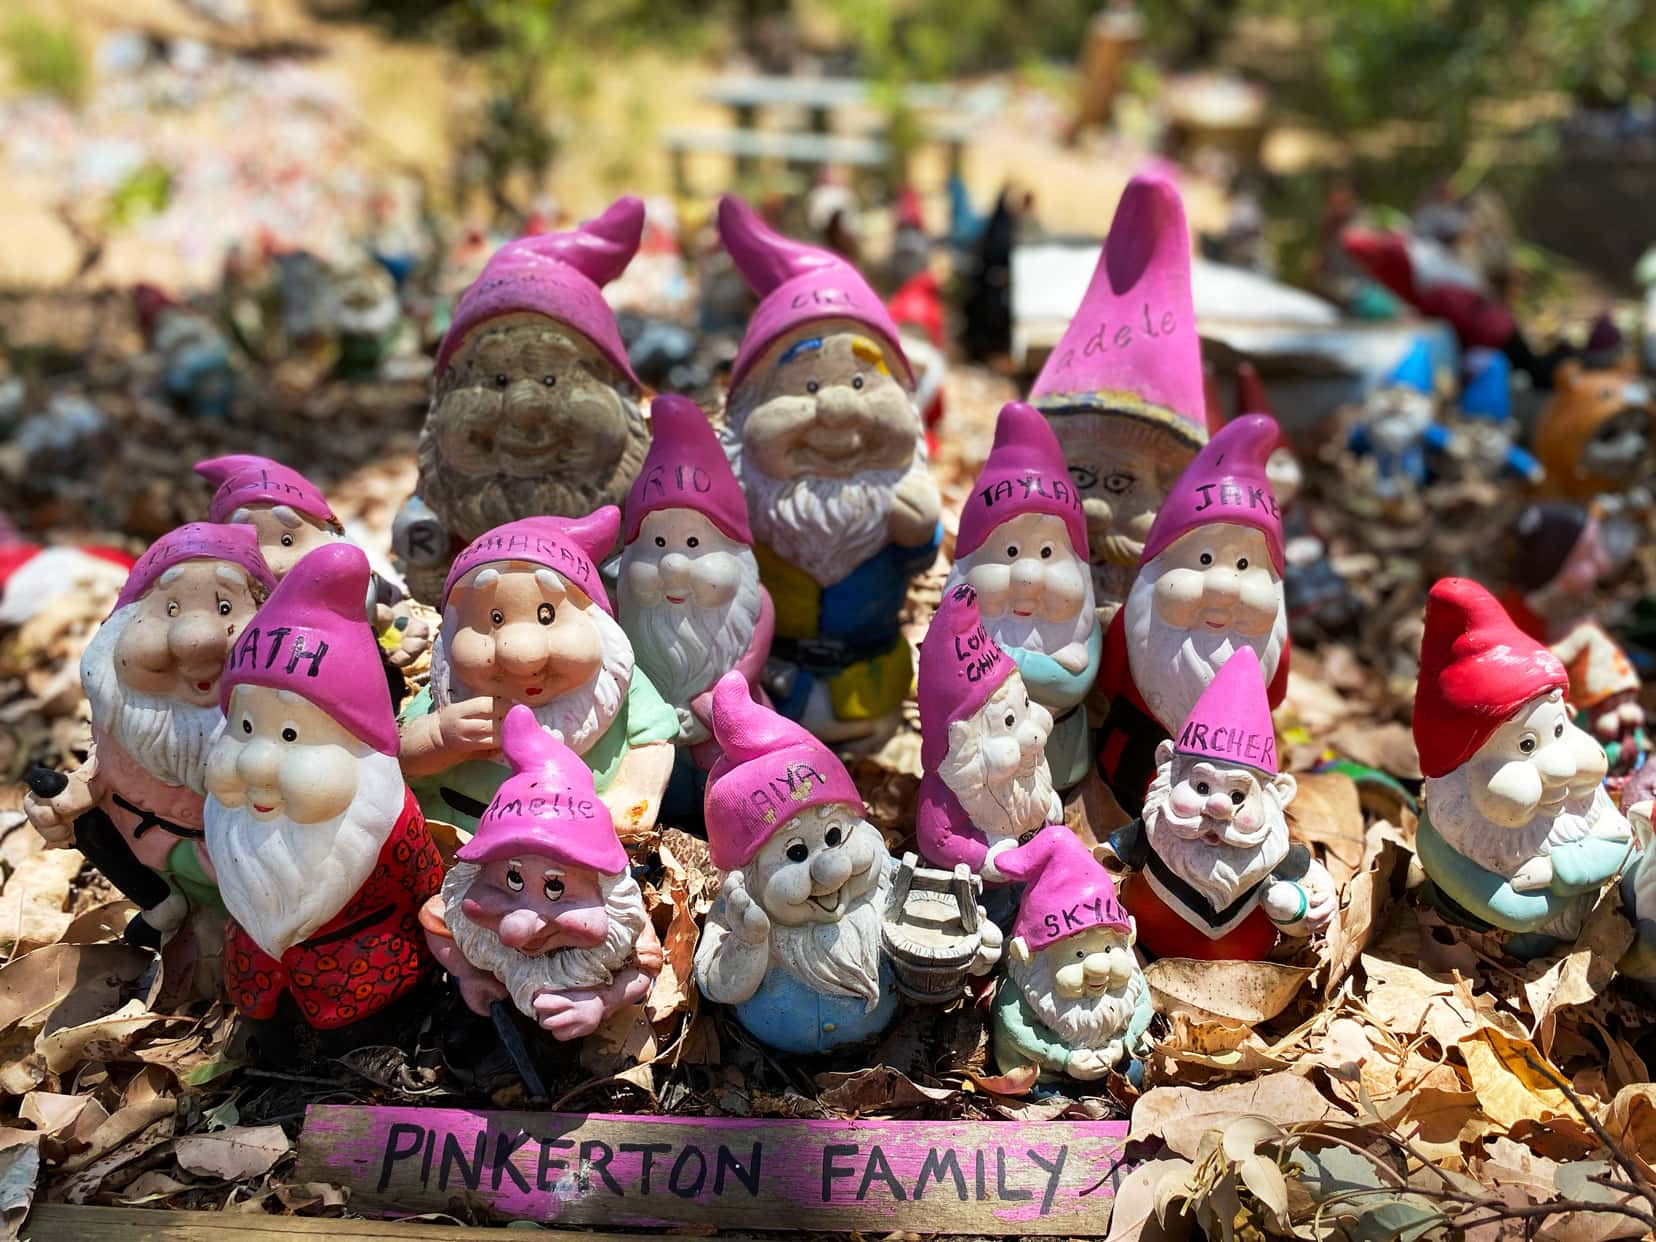 A group of gnomes in pink hats representing the Pinkerton family